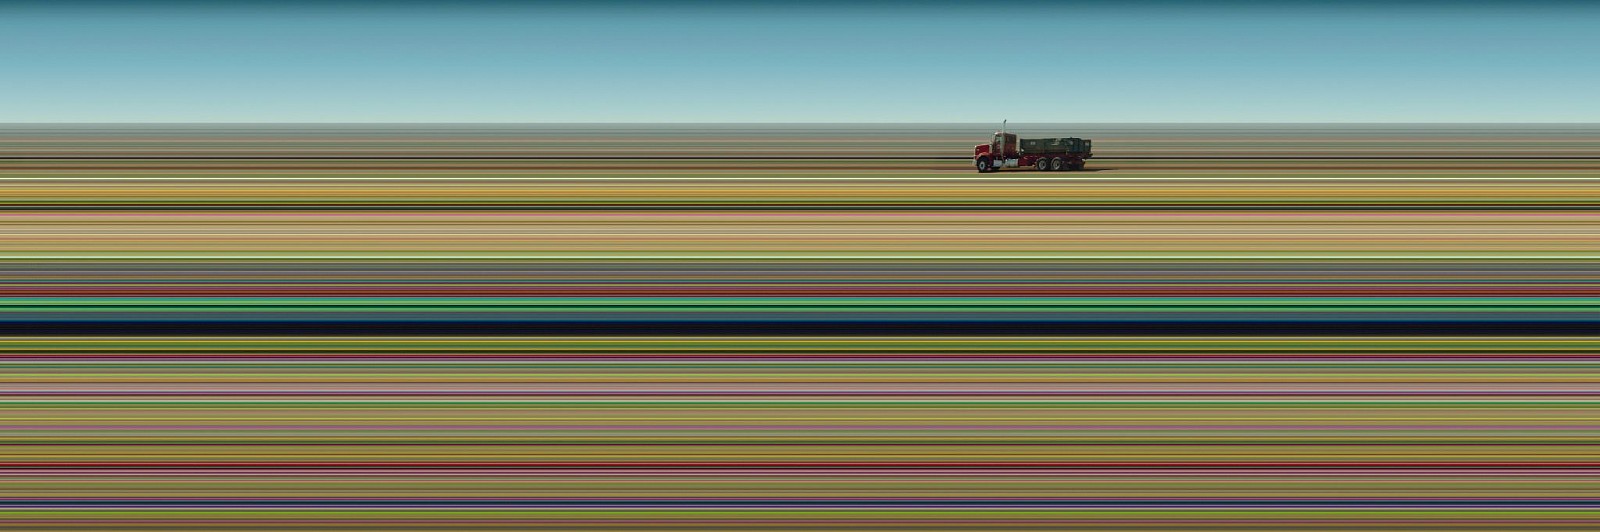 Jay Mark Johnson, SIMI VALLEY LANDFILL #12, 2014 Simi Valley
archival pigment on paper, mounted on aluminum, 40 x 120 in. (101.6 x 304.8 cm)